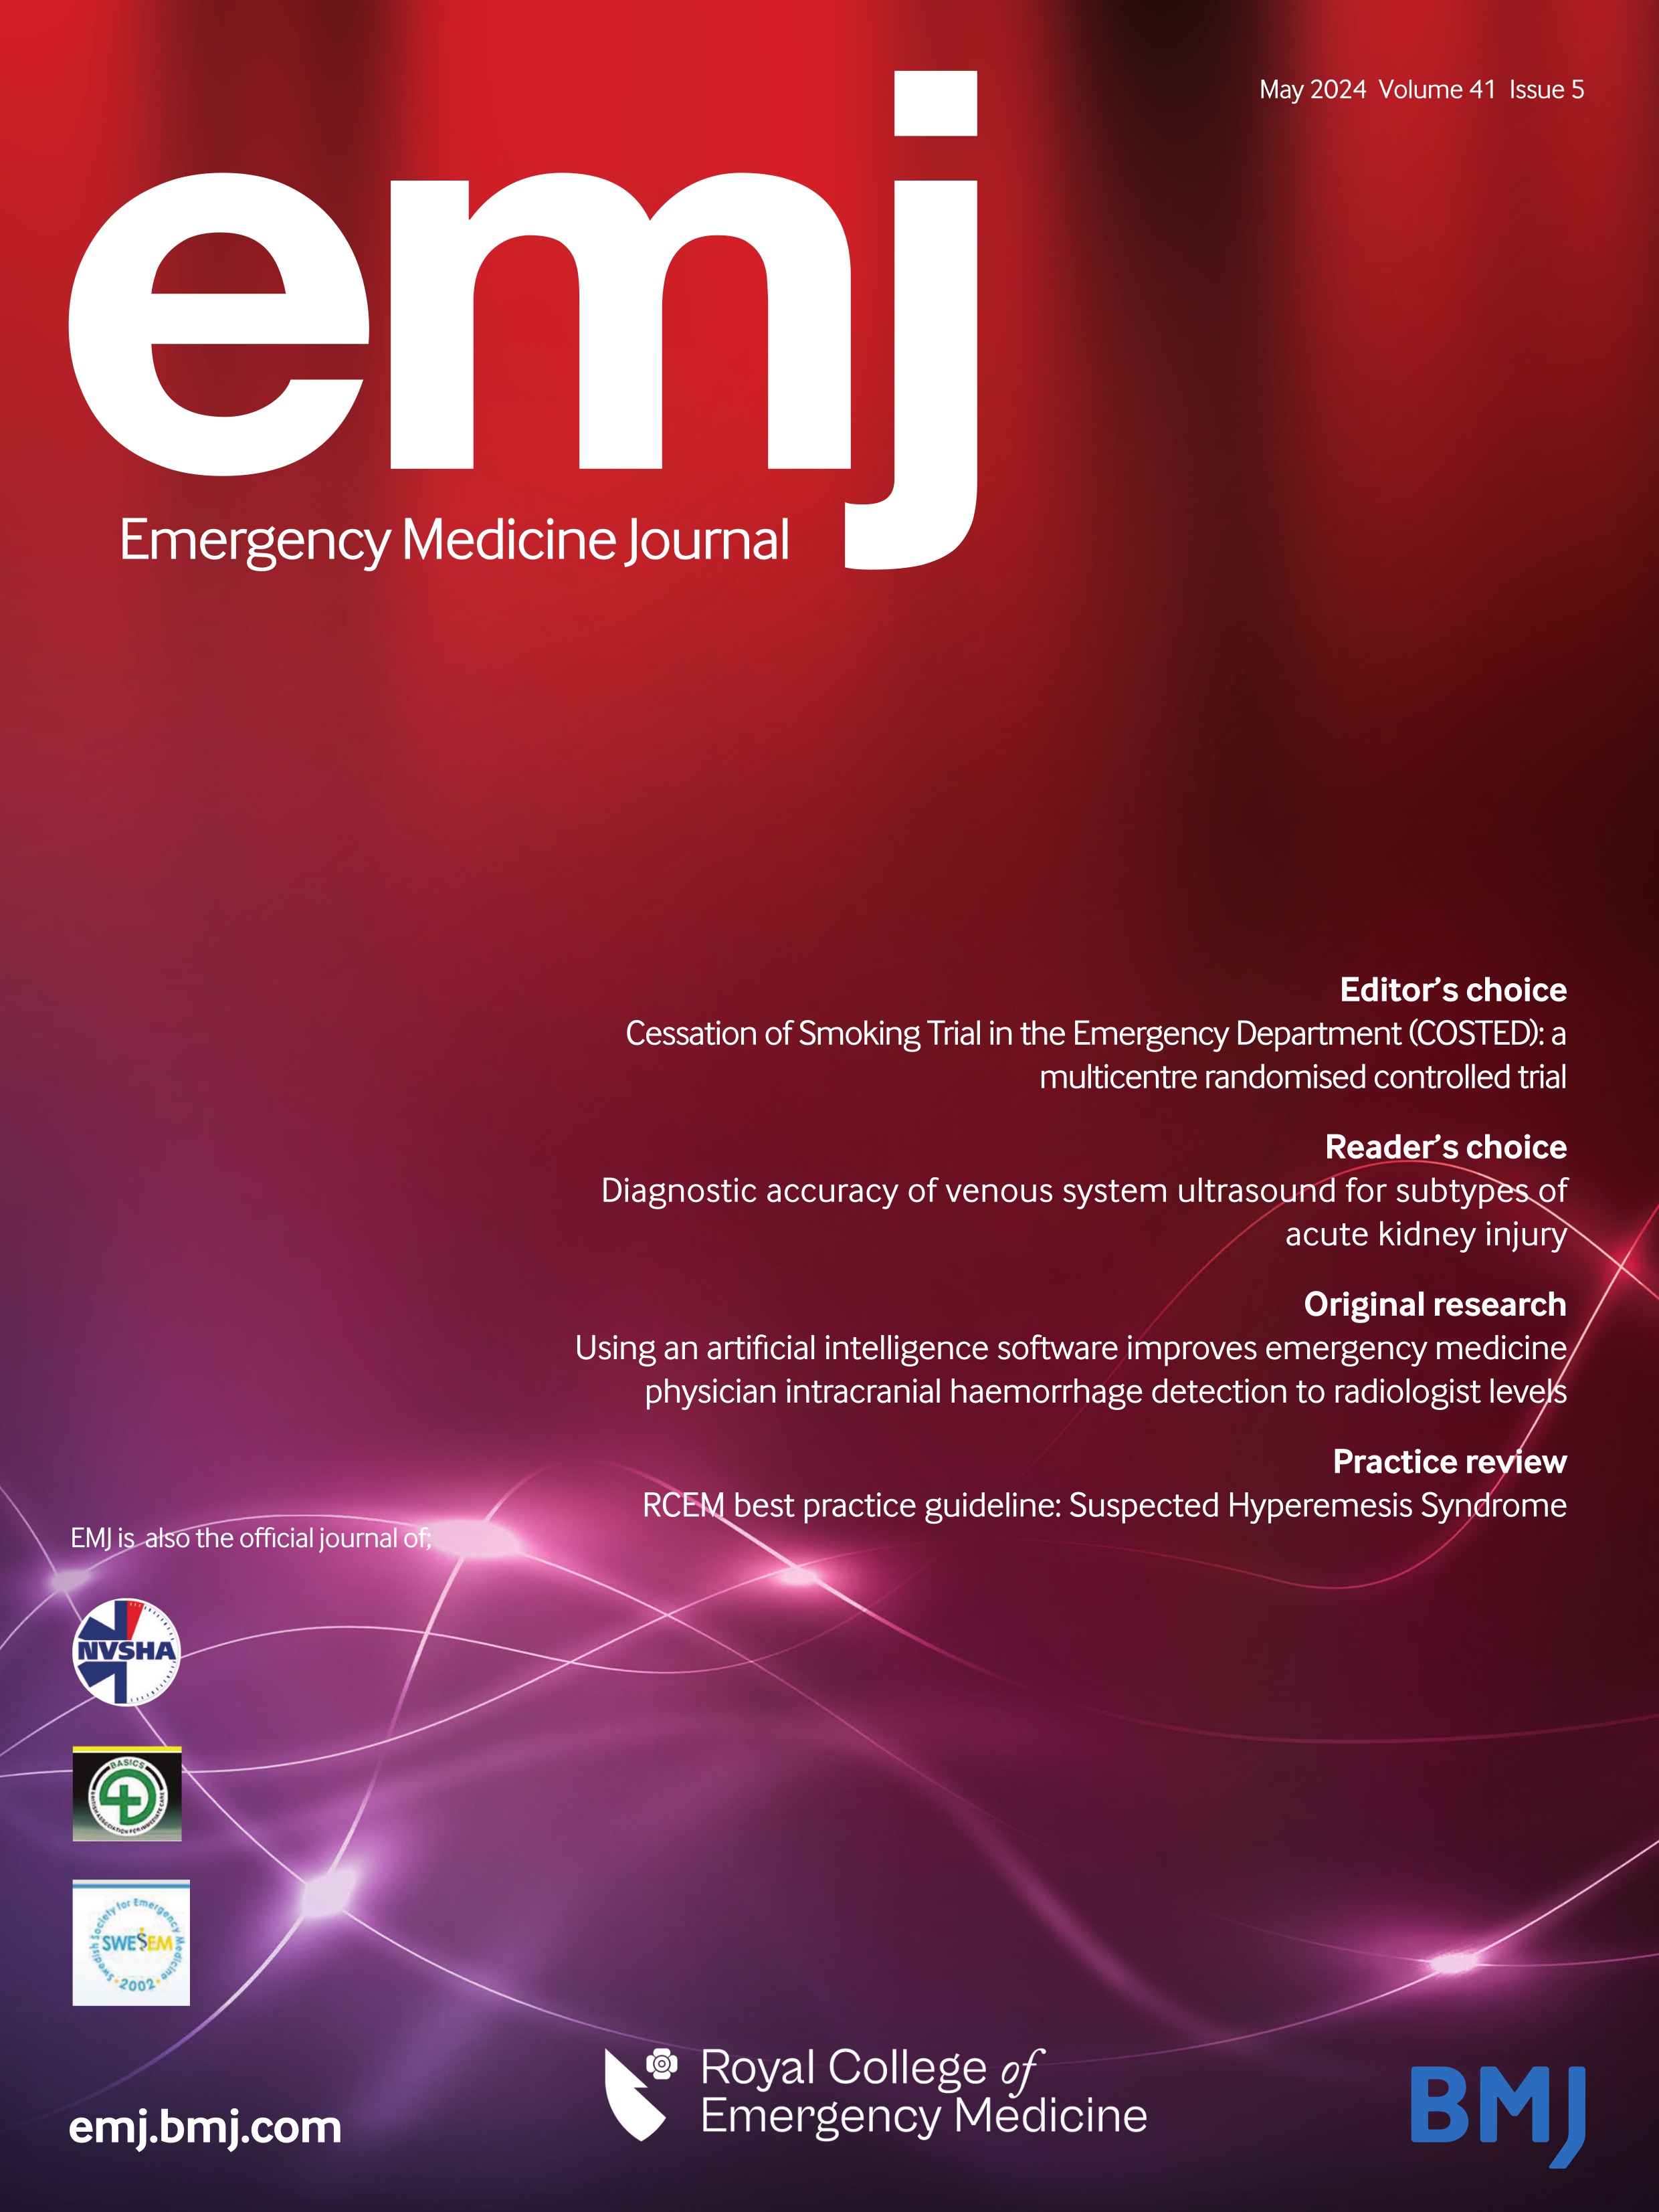 RCEM best practice guideline: suspected cannabinoid hyperemesis syndrome in emergency departments